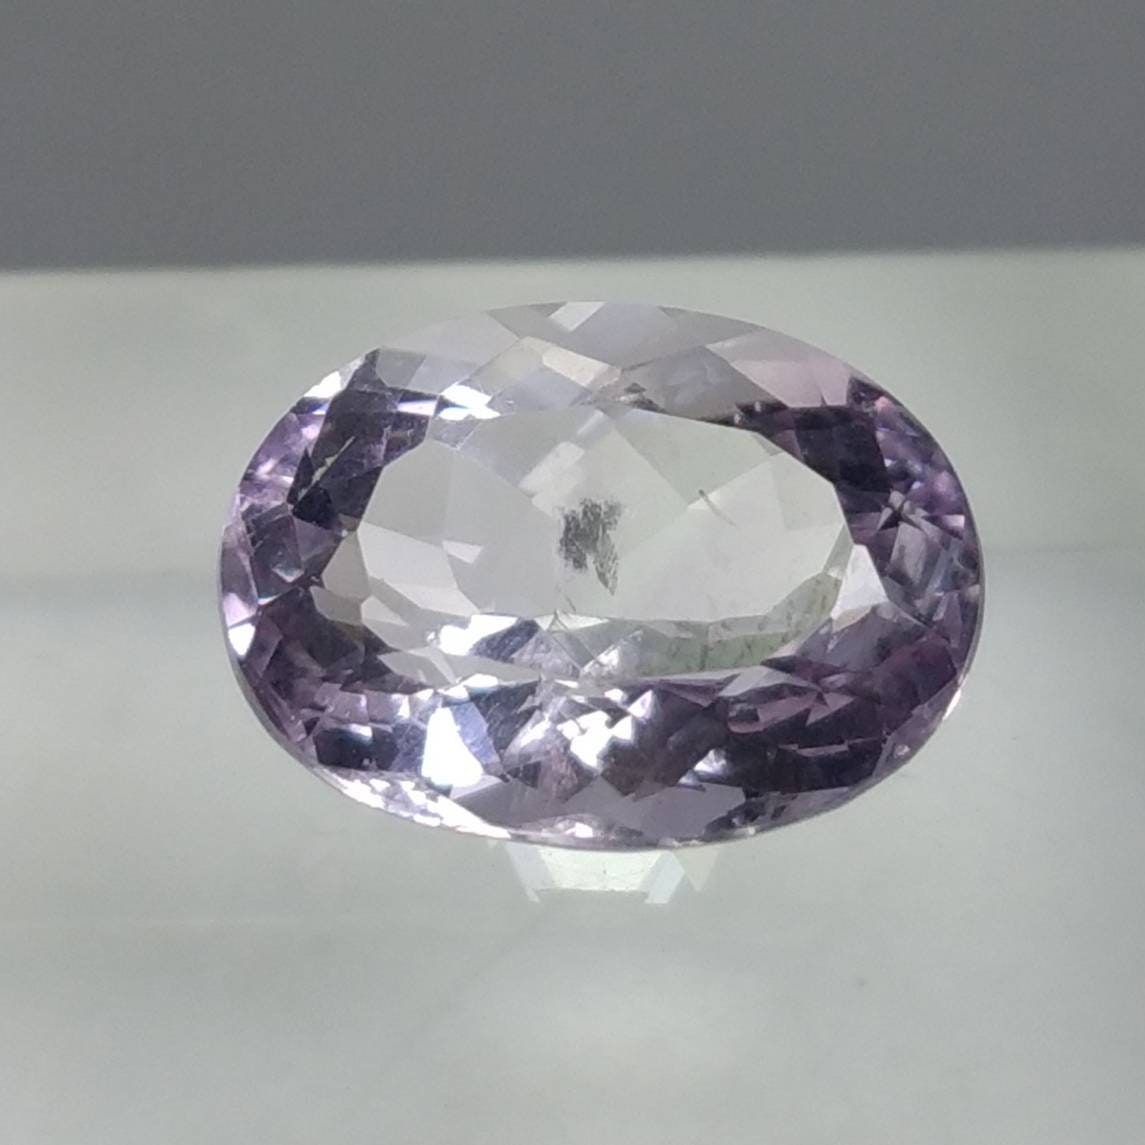 ARSAA GEMS AND MINERALSNatural fine quality beautiful 6.5 carats VV clarity faceted oval shape amethyst gem - Premium  from ARSAA GEMS AND MINERALS - Just $13.00! Shop now at ARSAA GEMS AND MINERALS